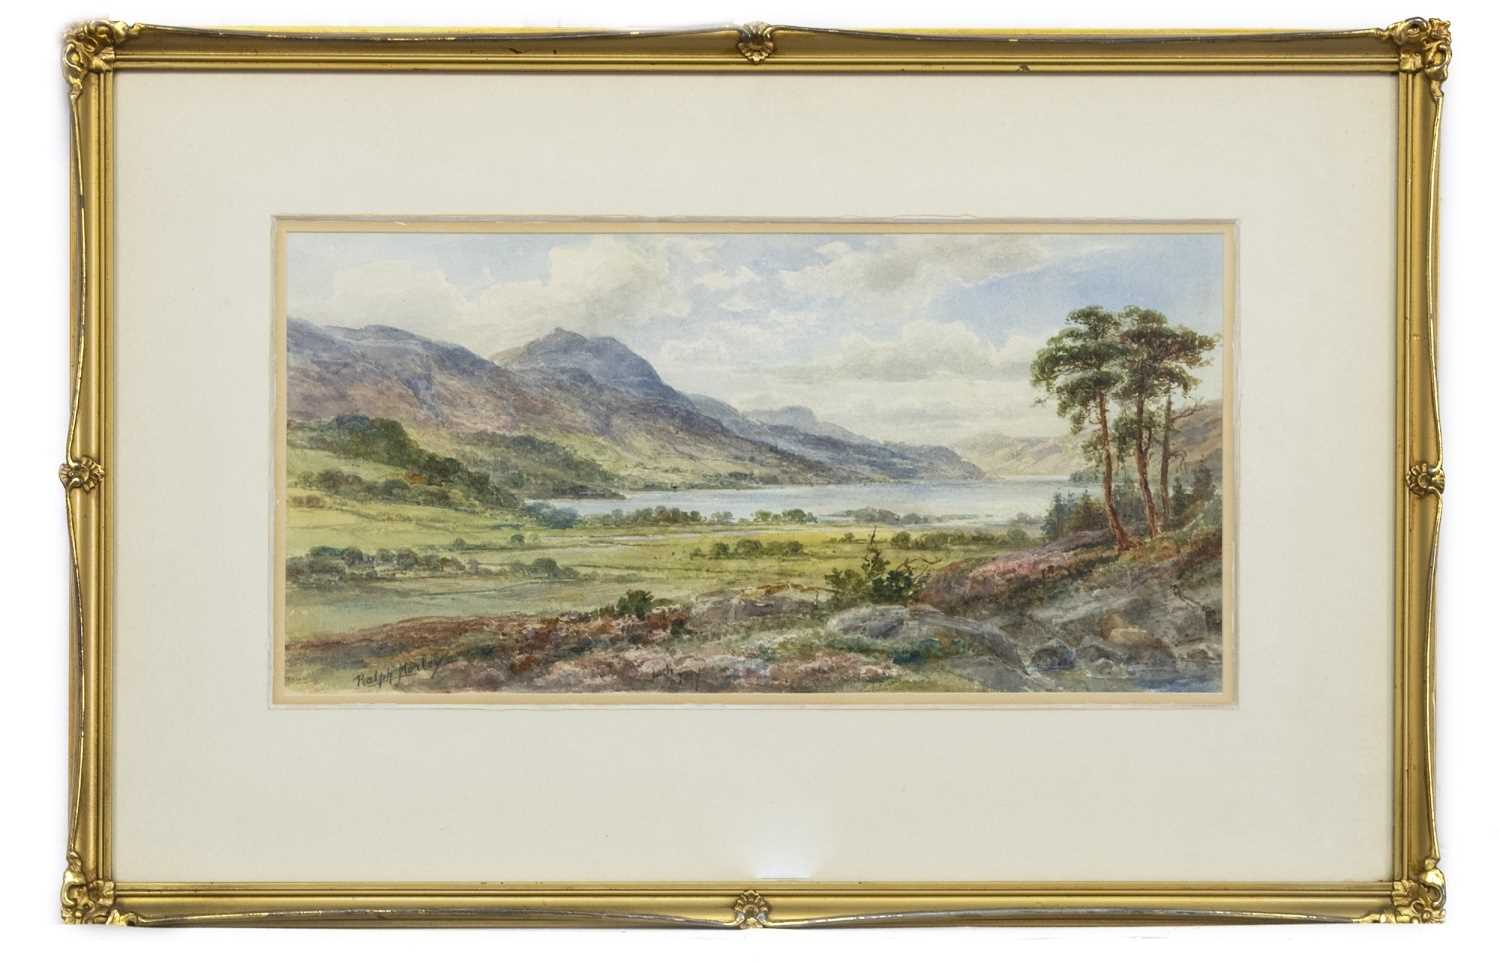 LOCH TAY, A WATERCOLOUR BY RALPH MORLEY